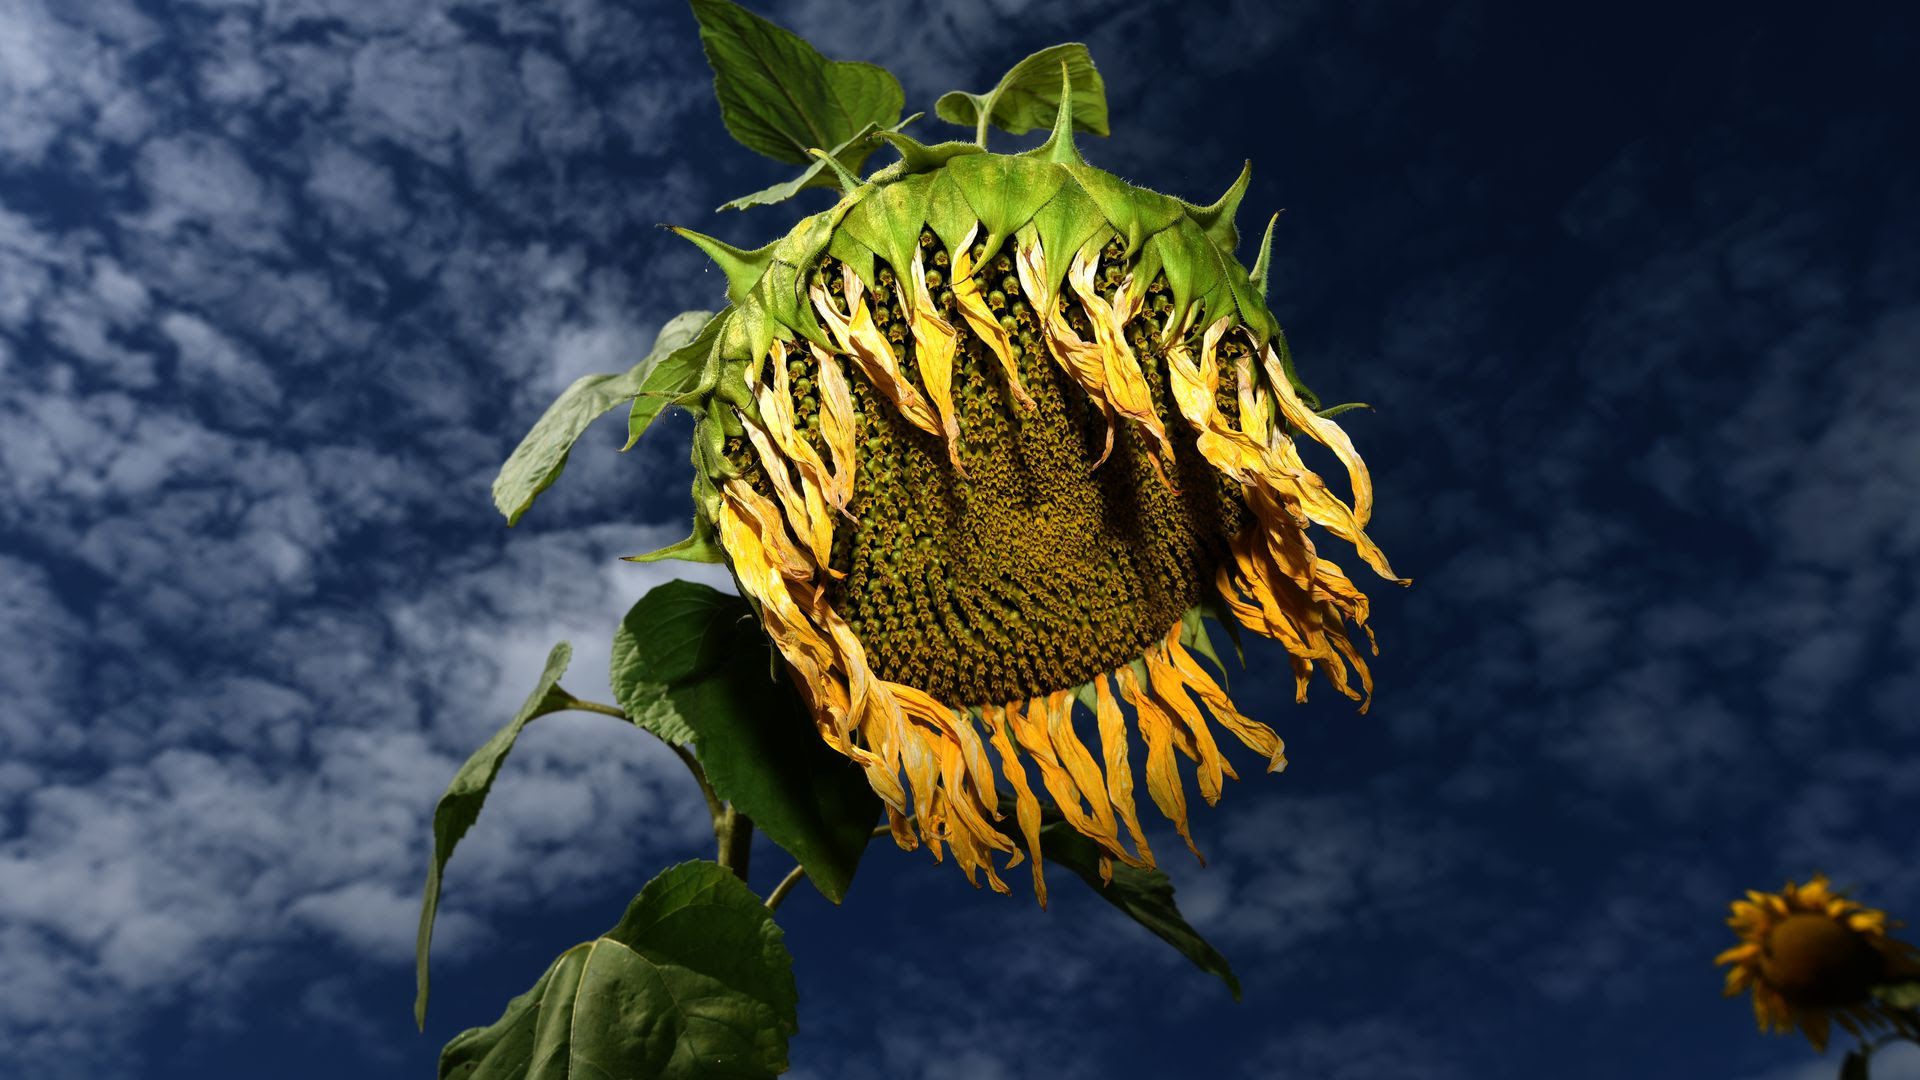 A photo of a dying sunflower